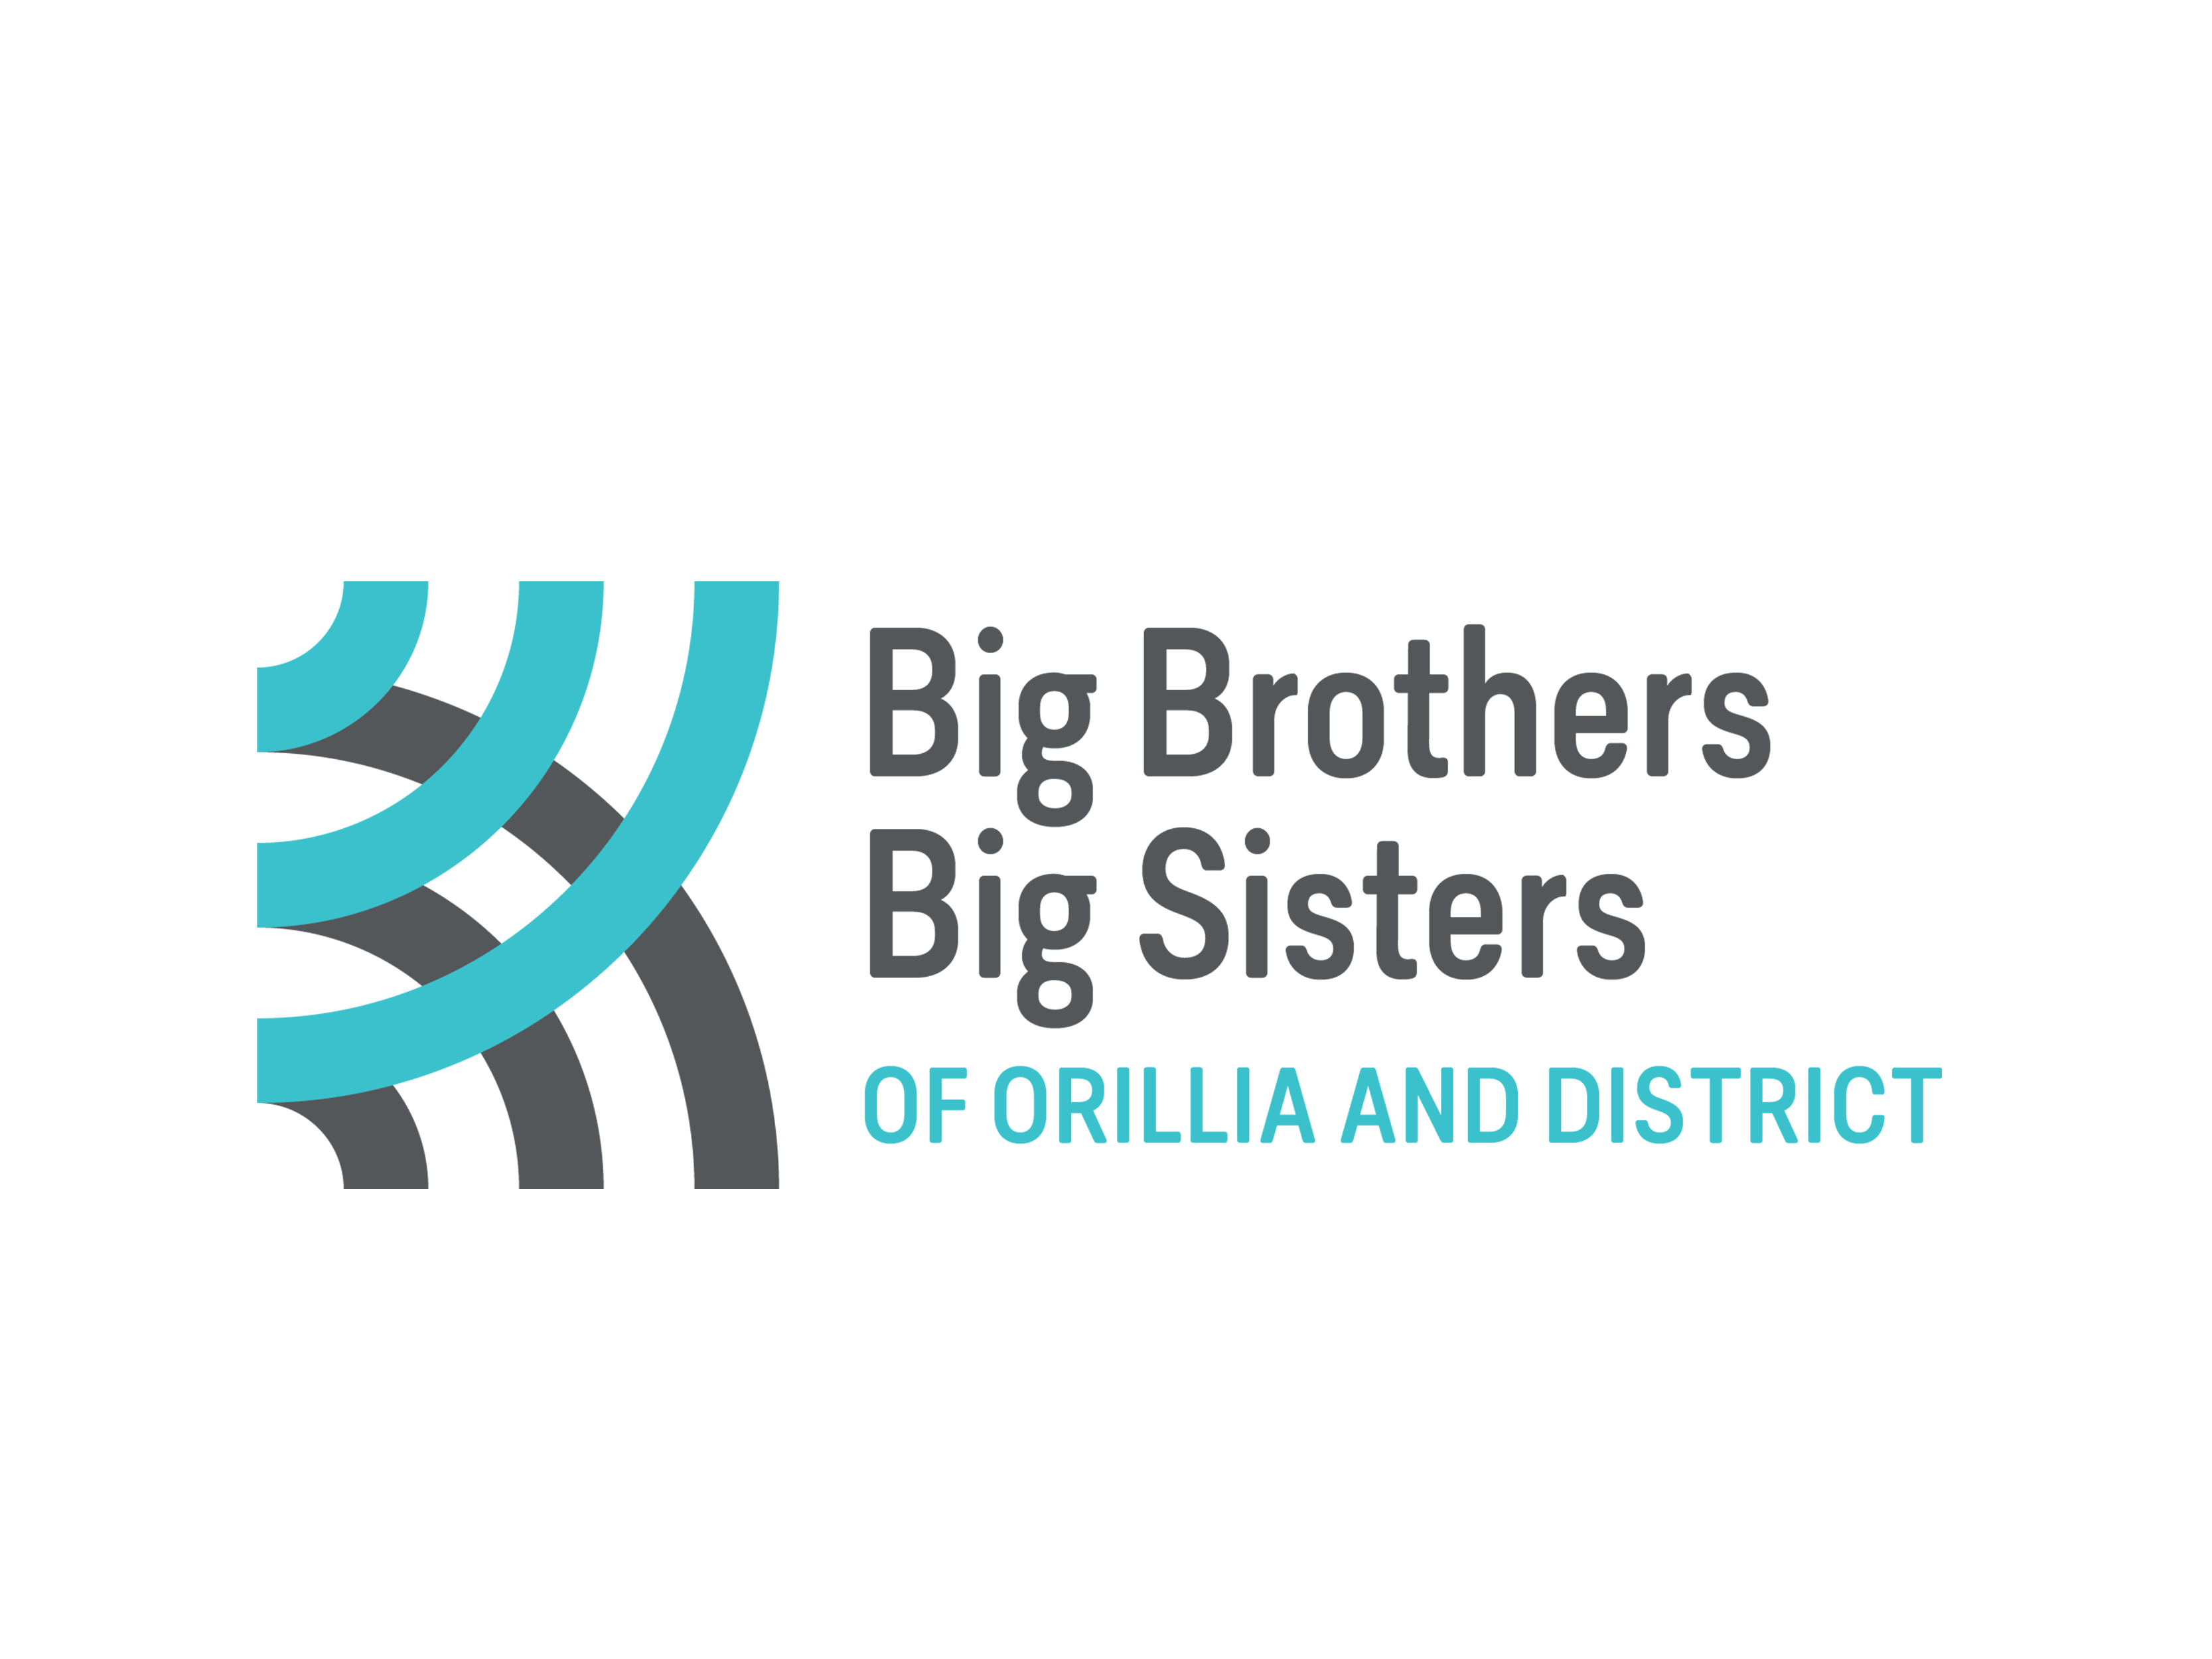 Big Brothers Big Sisters of Orillia and District logo